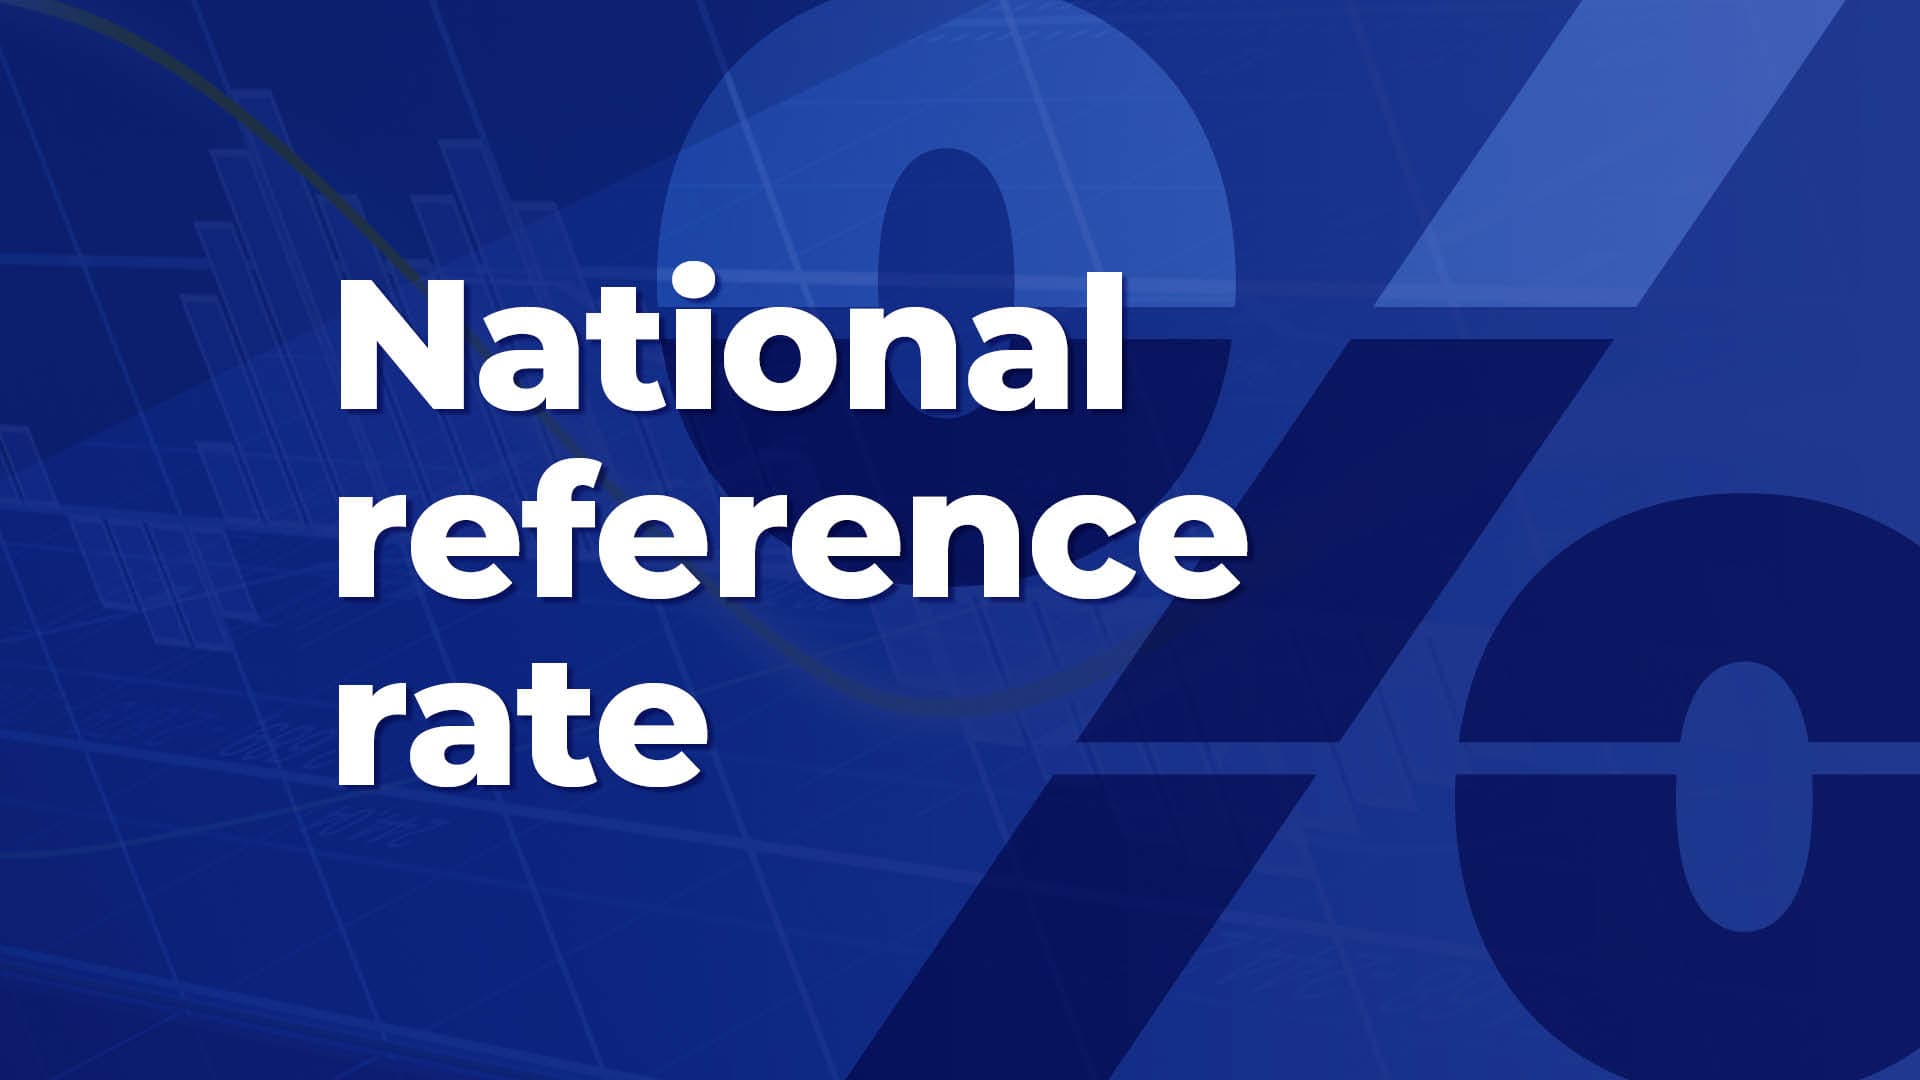 National reference rate (NRR) for 4Q 2022